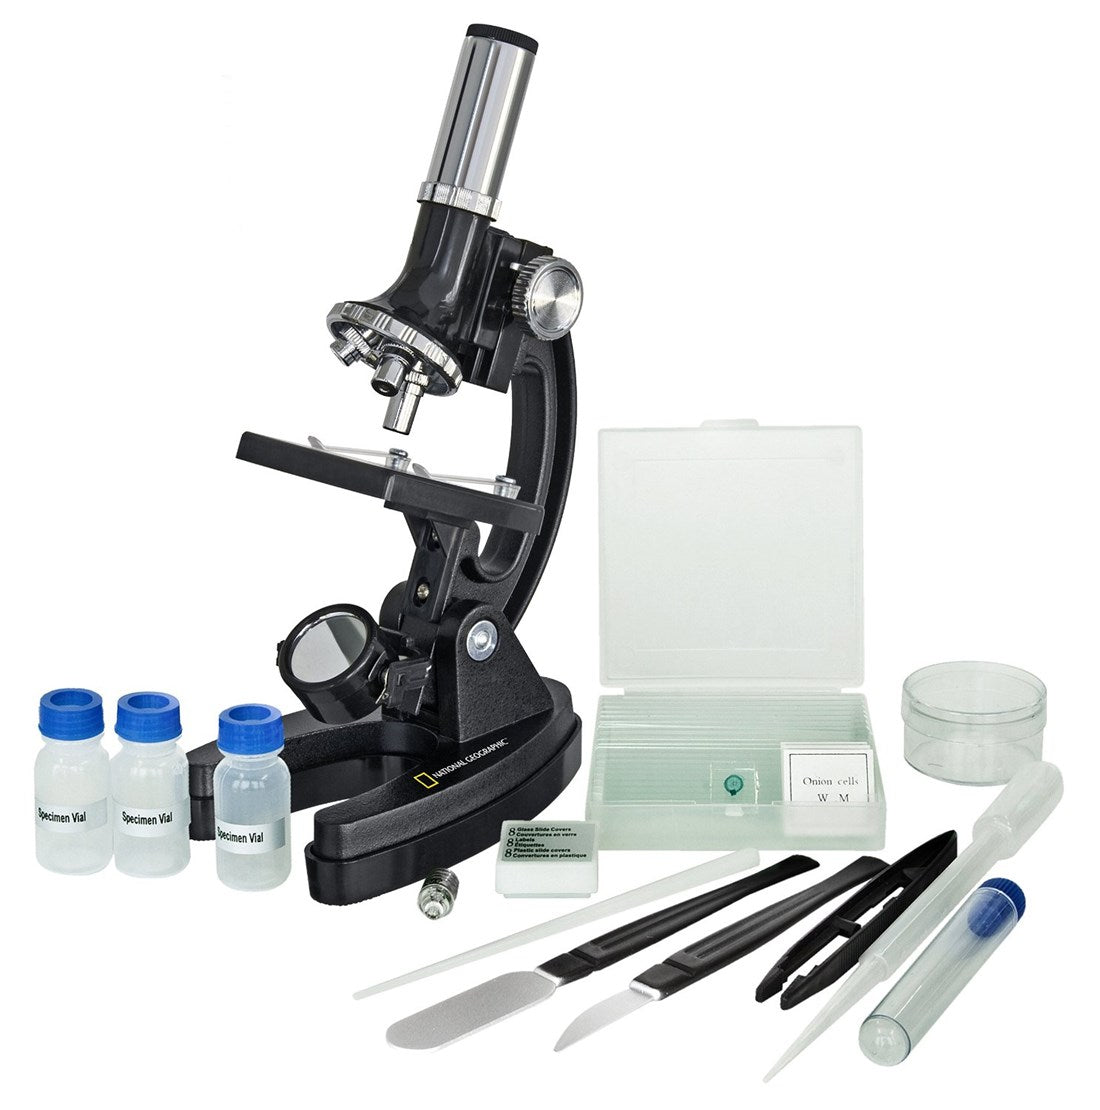 Product Image of National Geographic Microscope 300x-1200x with accessories